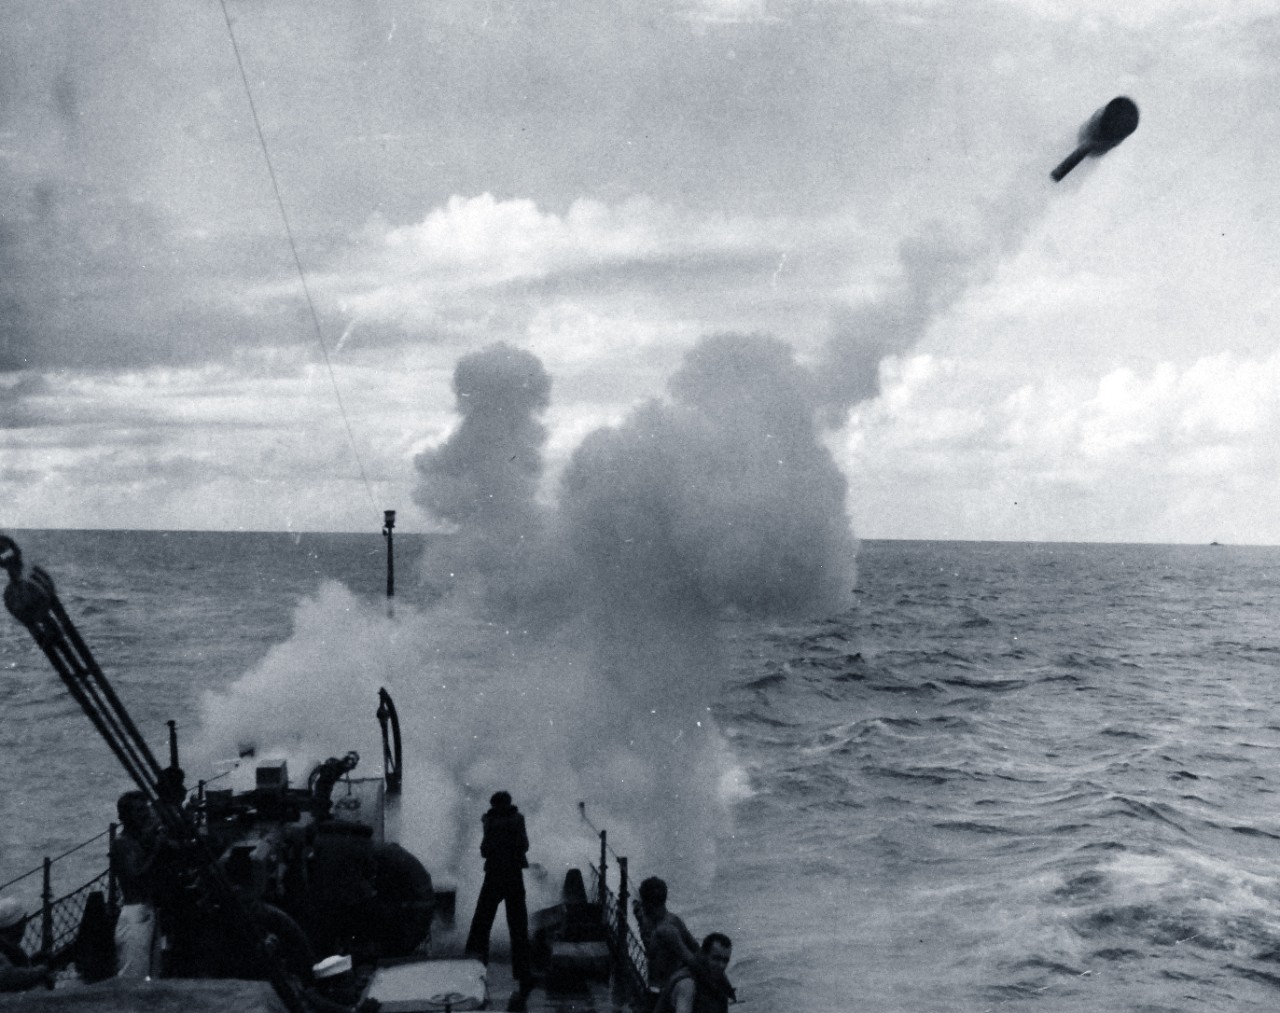 <p>80-G-40330: Battle of the Atlantic: Weapons: K-Gun. A depth charge is fired from a “K” gun by a U.S. Navy boat patrolling the coast, between February 1942 and 1943.&nbsp;</p>
